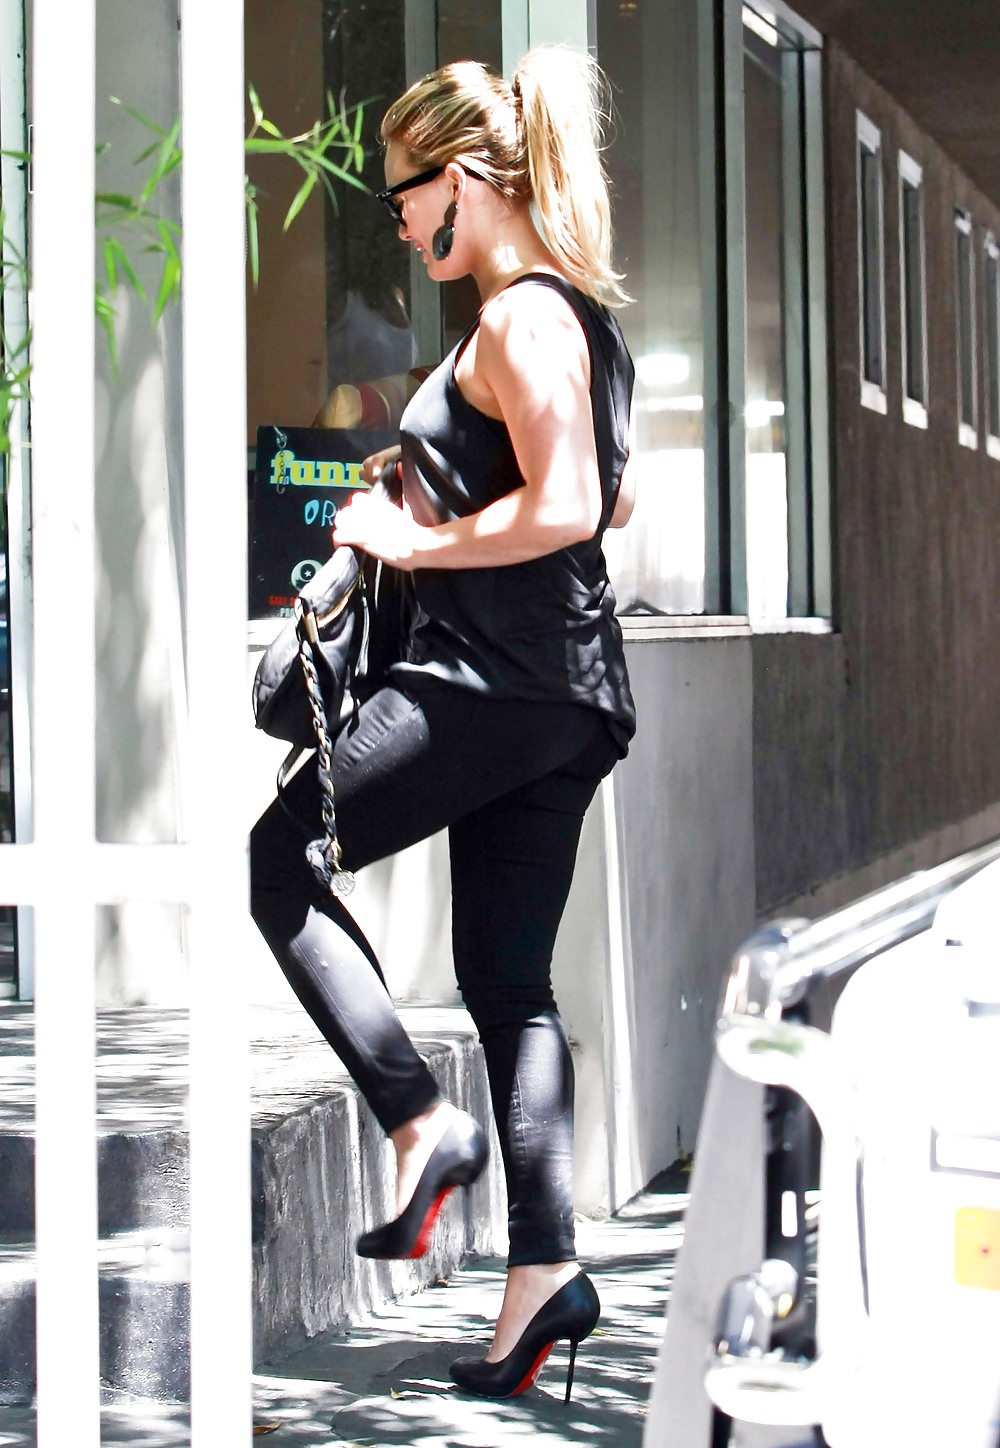 Hilary Duff July 19 at Funny or die studios #4753142